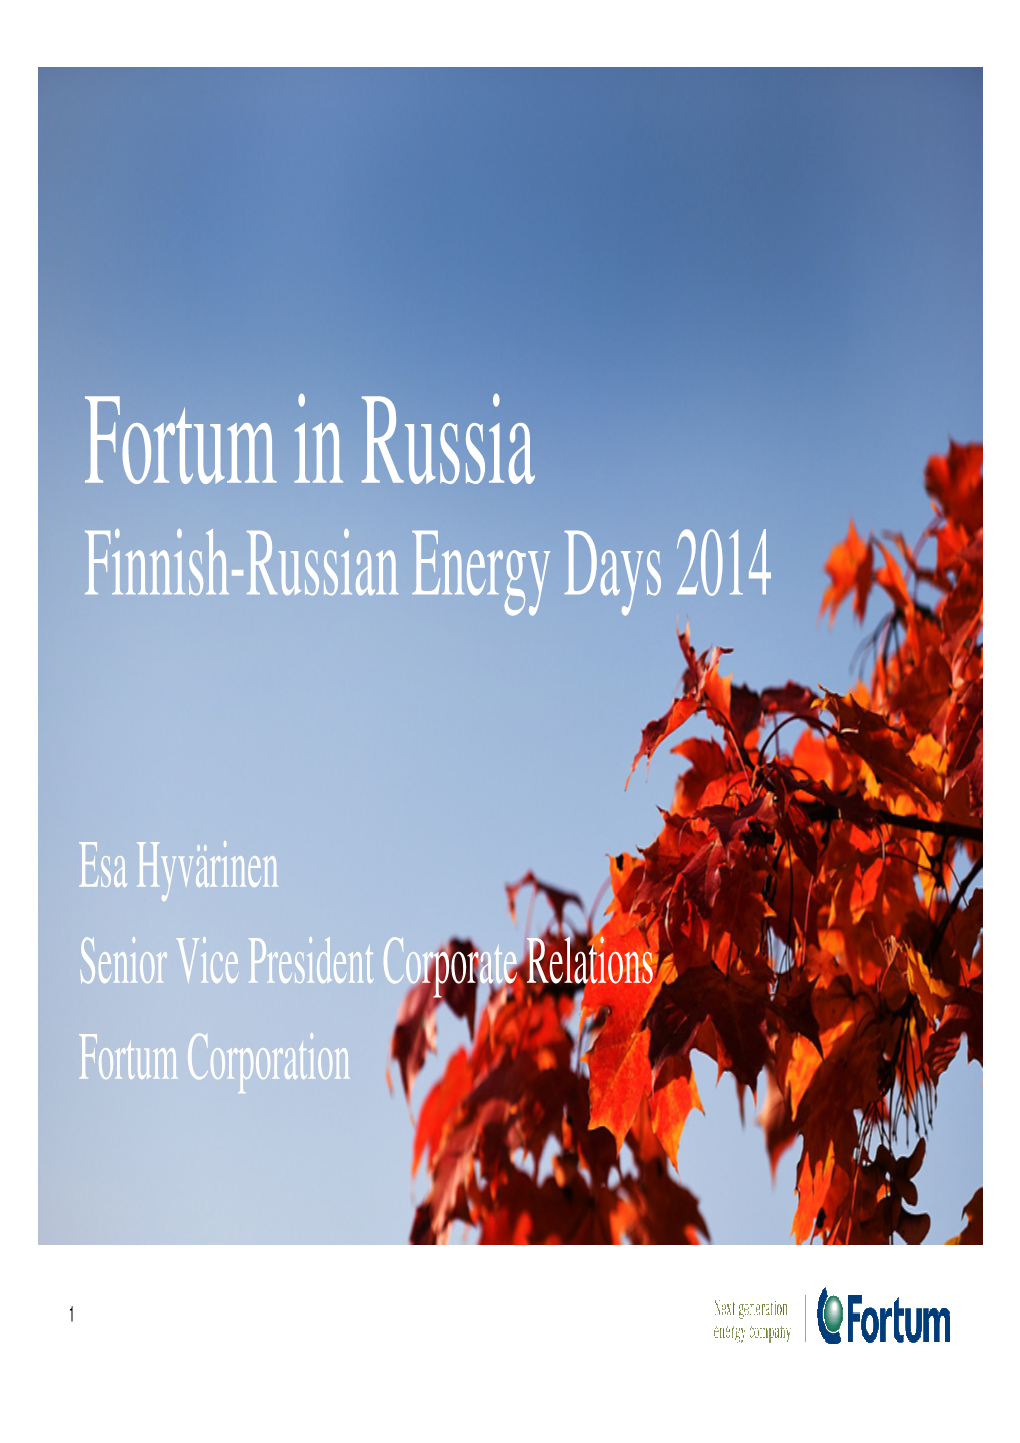 Fortum in Russia Finnish-Russian Energy Days 2014